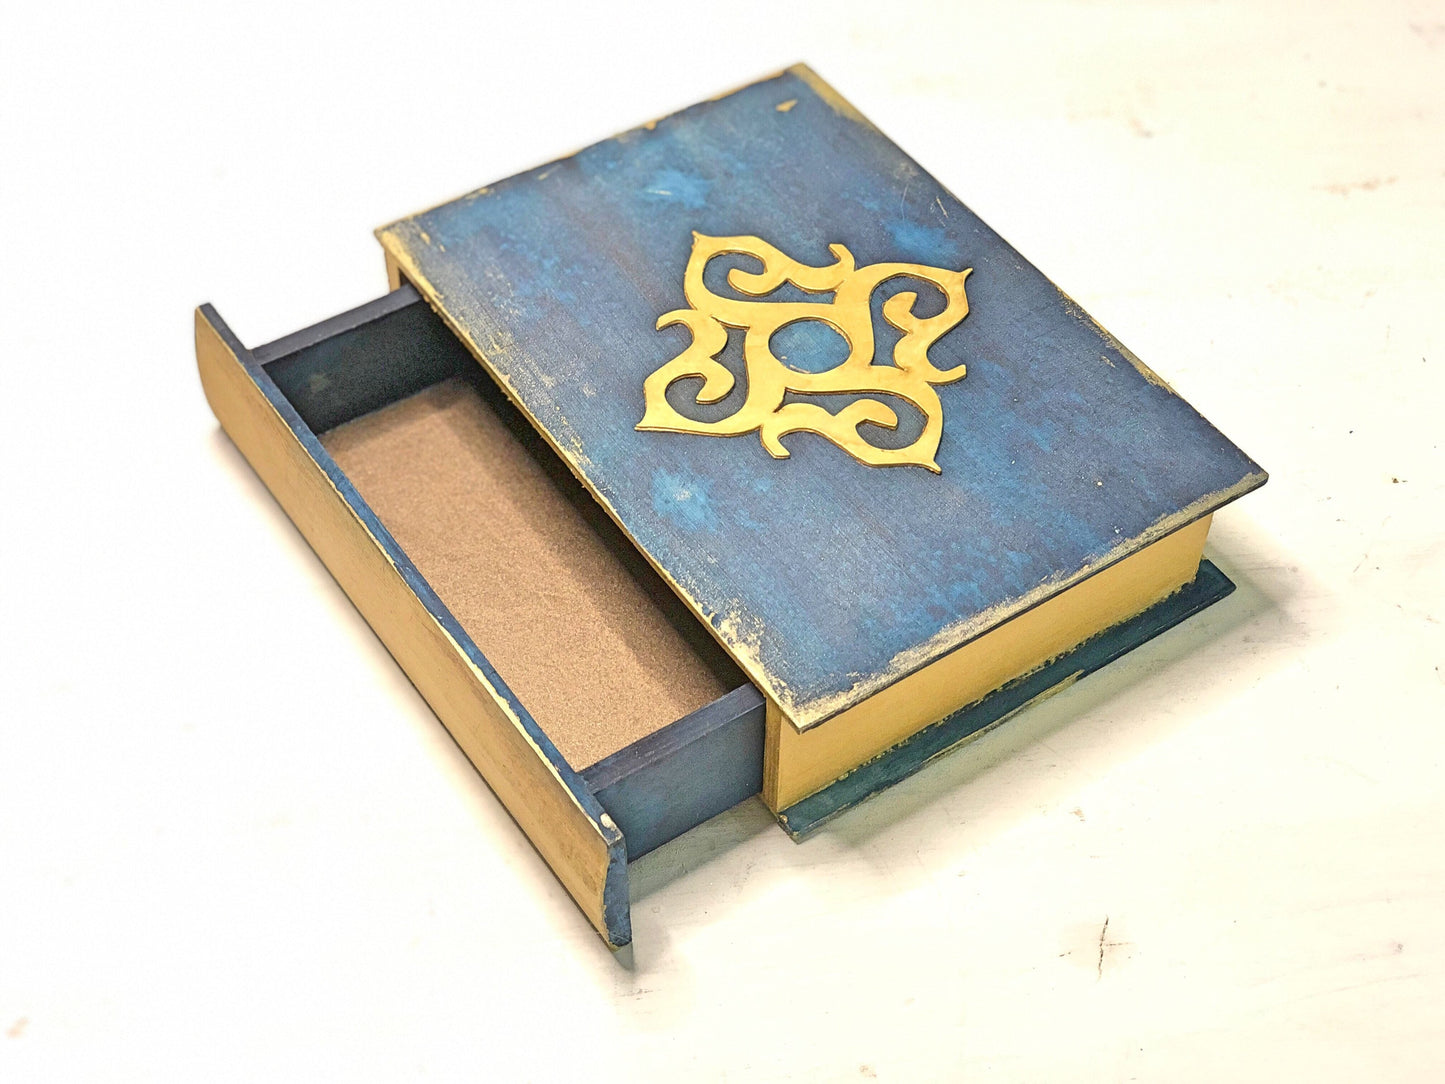 Spellbox with Eternity Magic Symbol, Fantasy Book Box with Secret Spine Drawer, Gift for Fantasy and Witchcraft Lovers, Dice Box